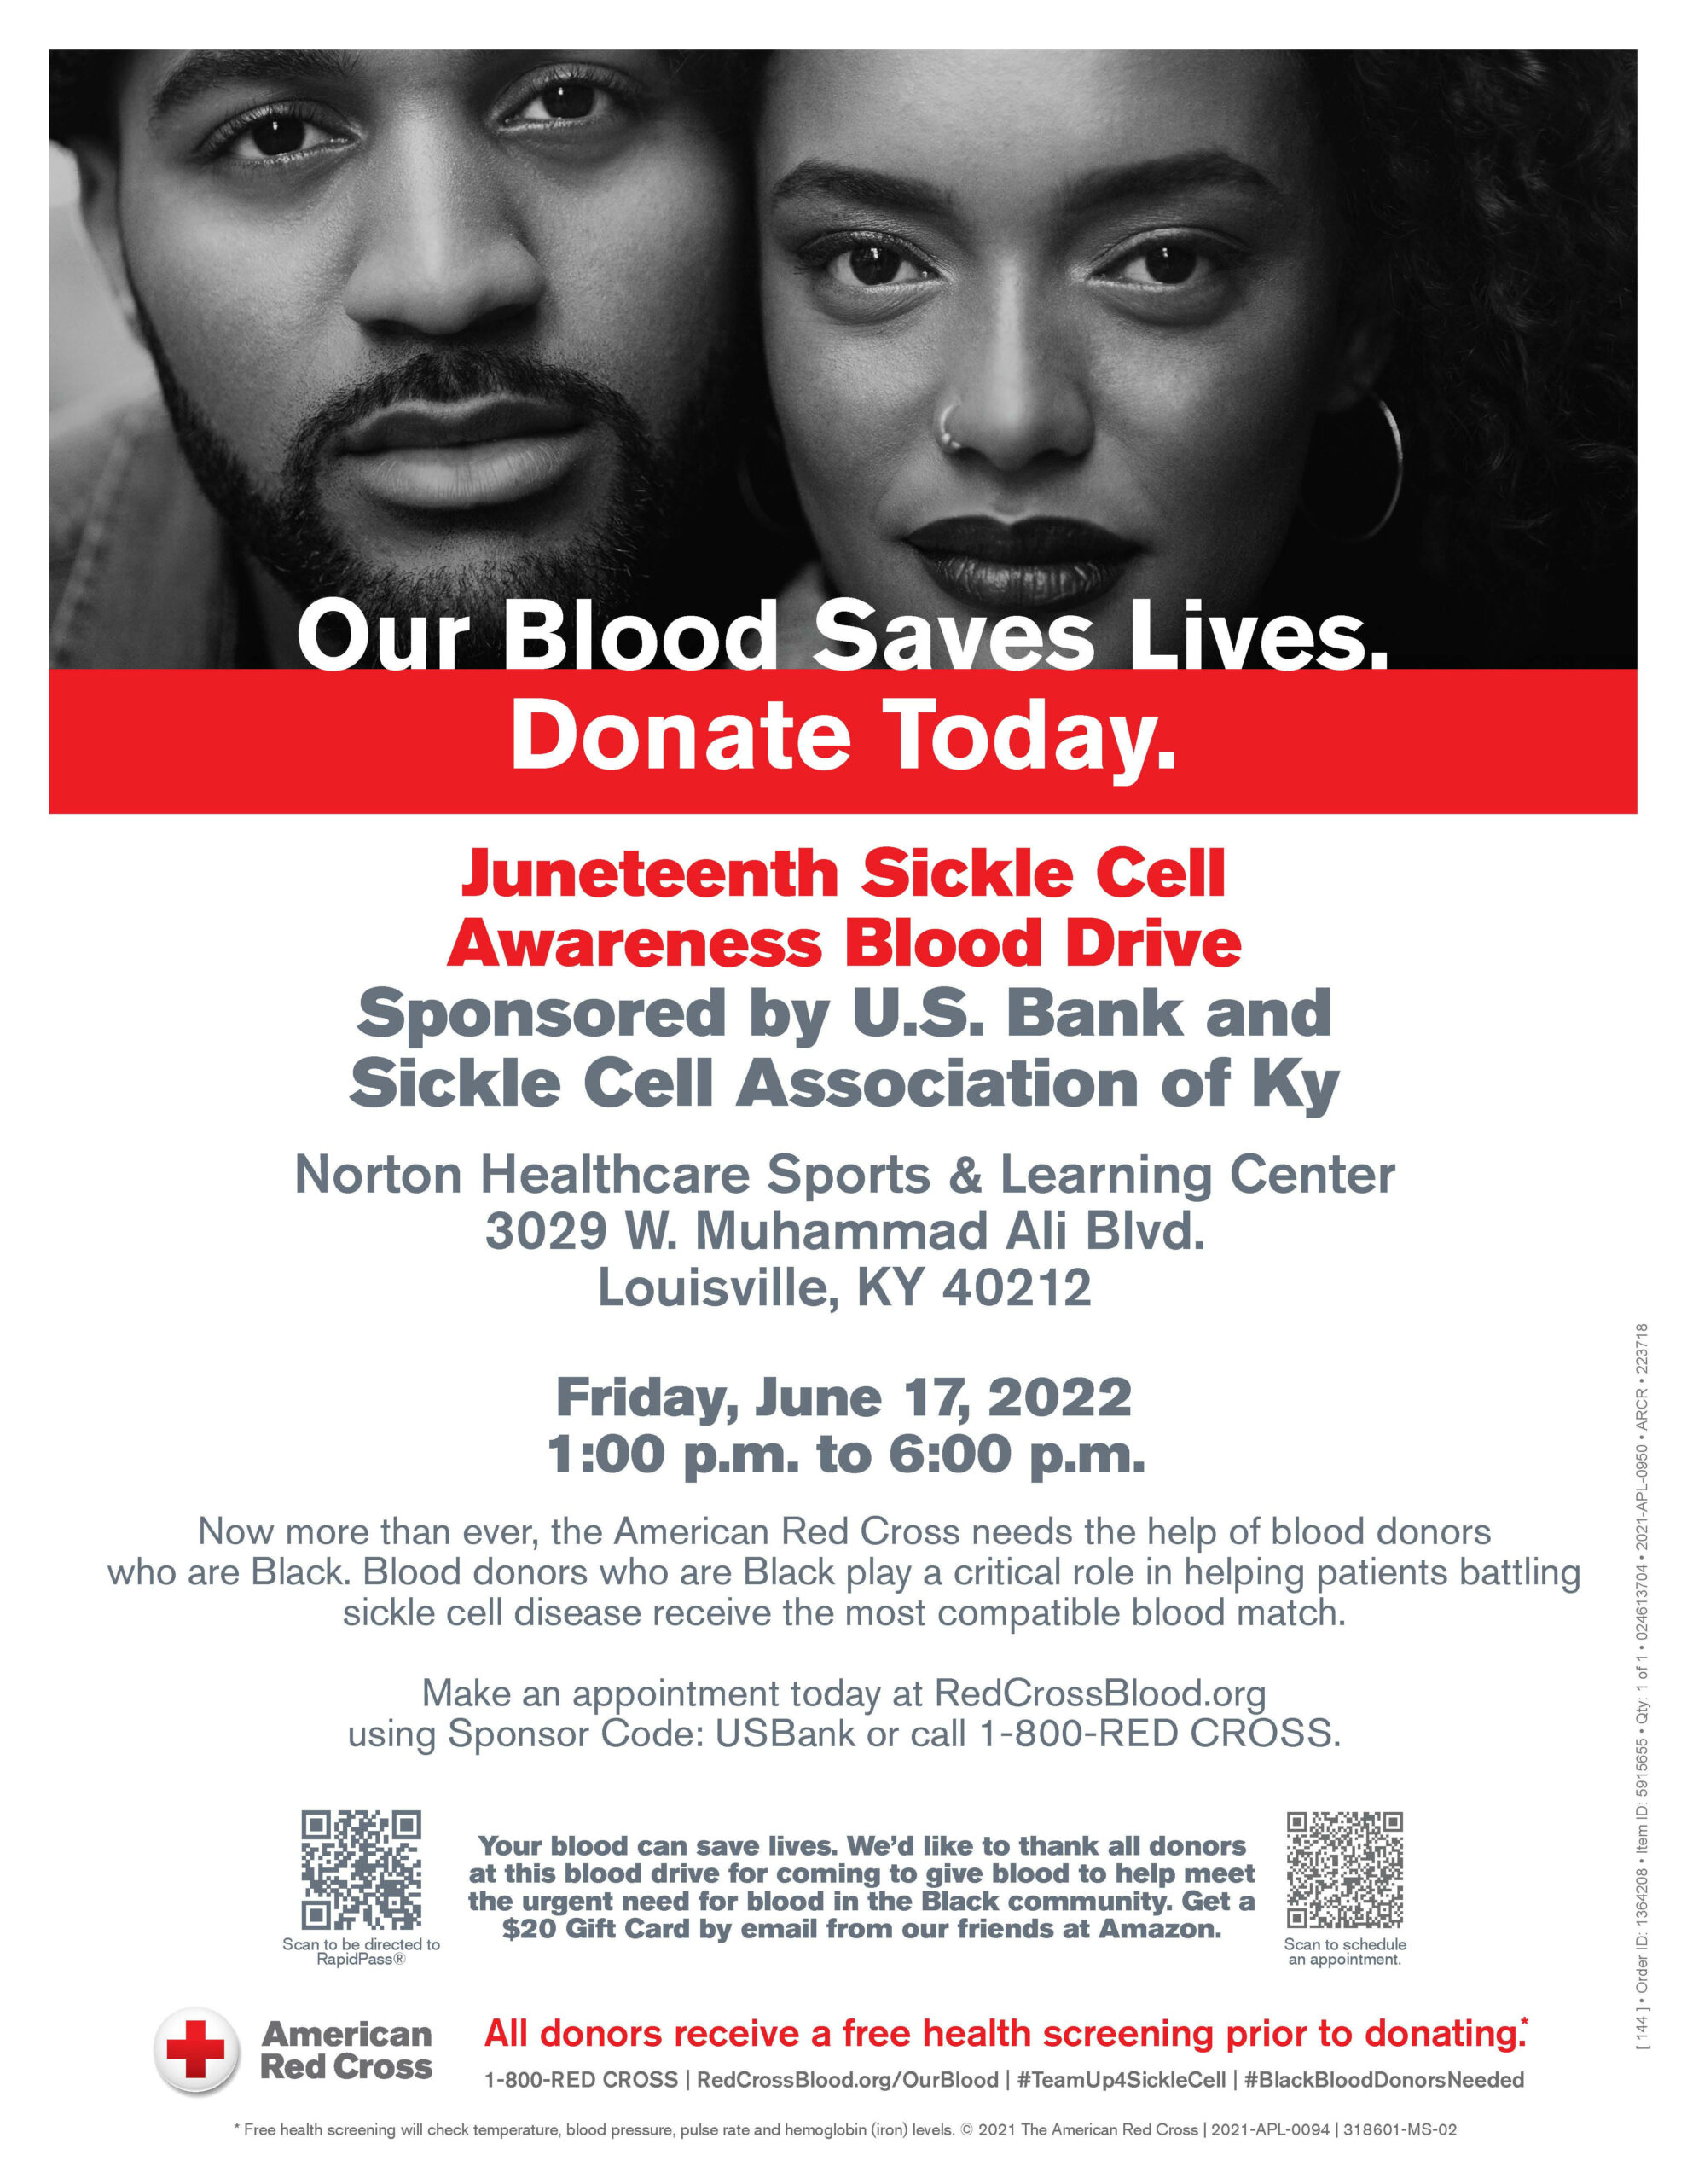 <h1 class="tribe-events-single-event-title">Juneteenth Sickle Cell Awareness Blood Drive</h1>